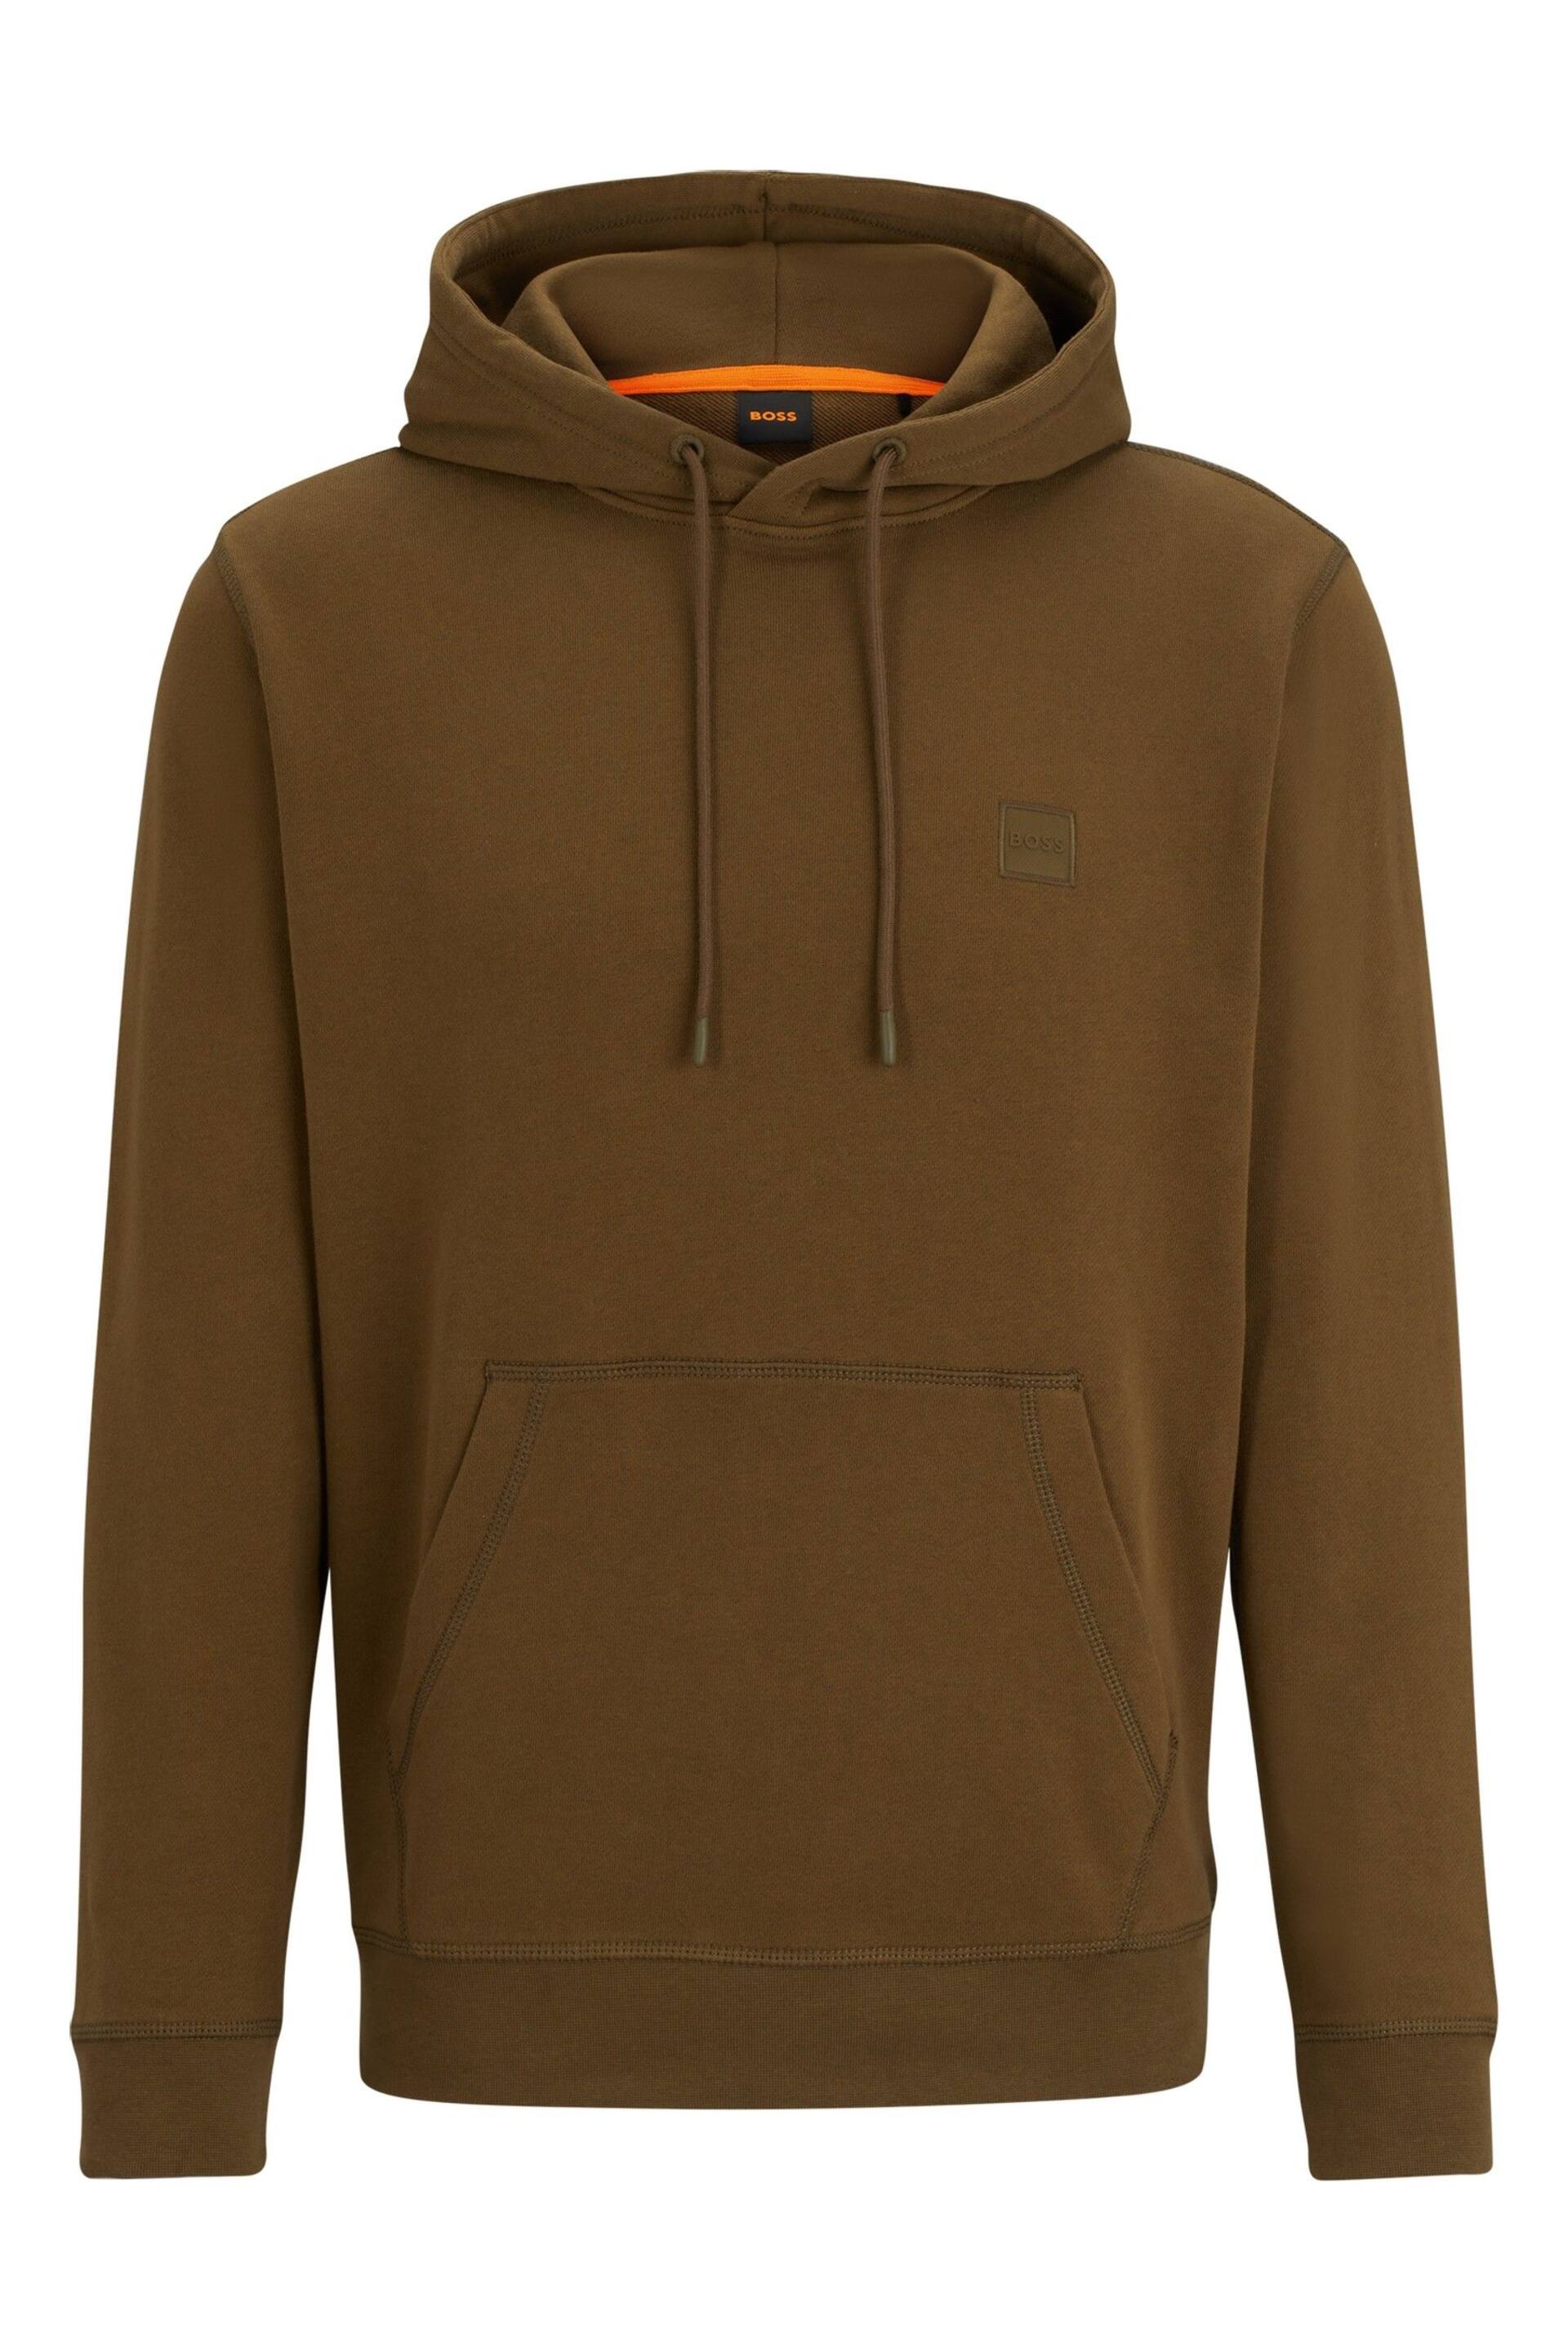 BOSS Green Logo-Patch Hoodie In Cotton Terry - Image 5 of 5